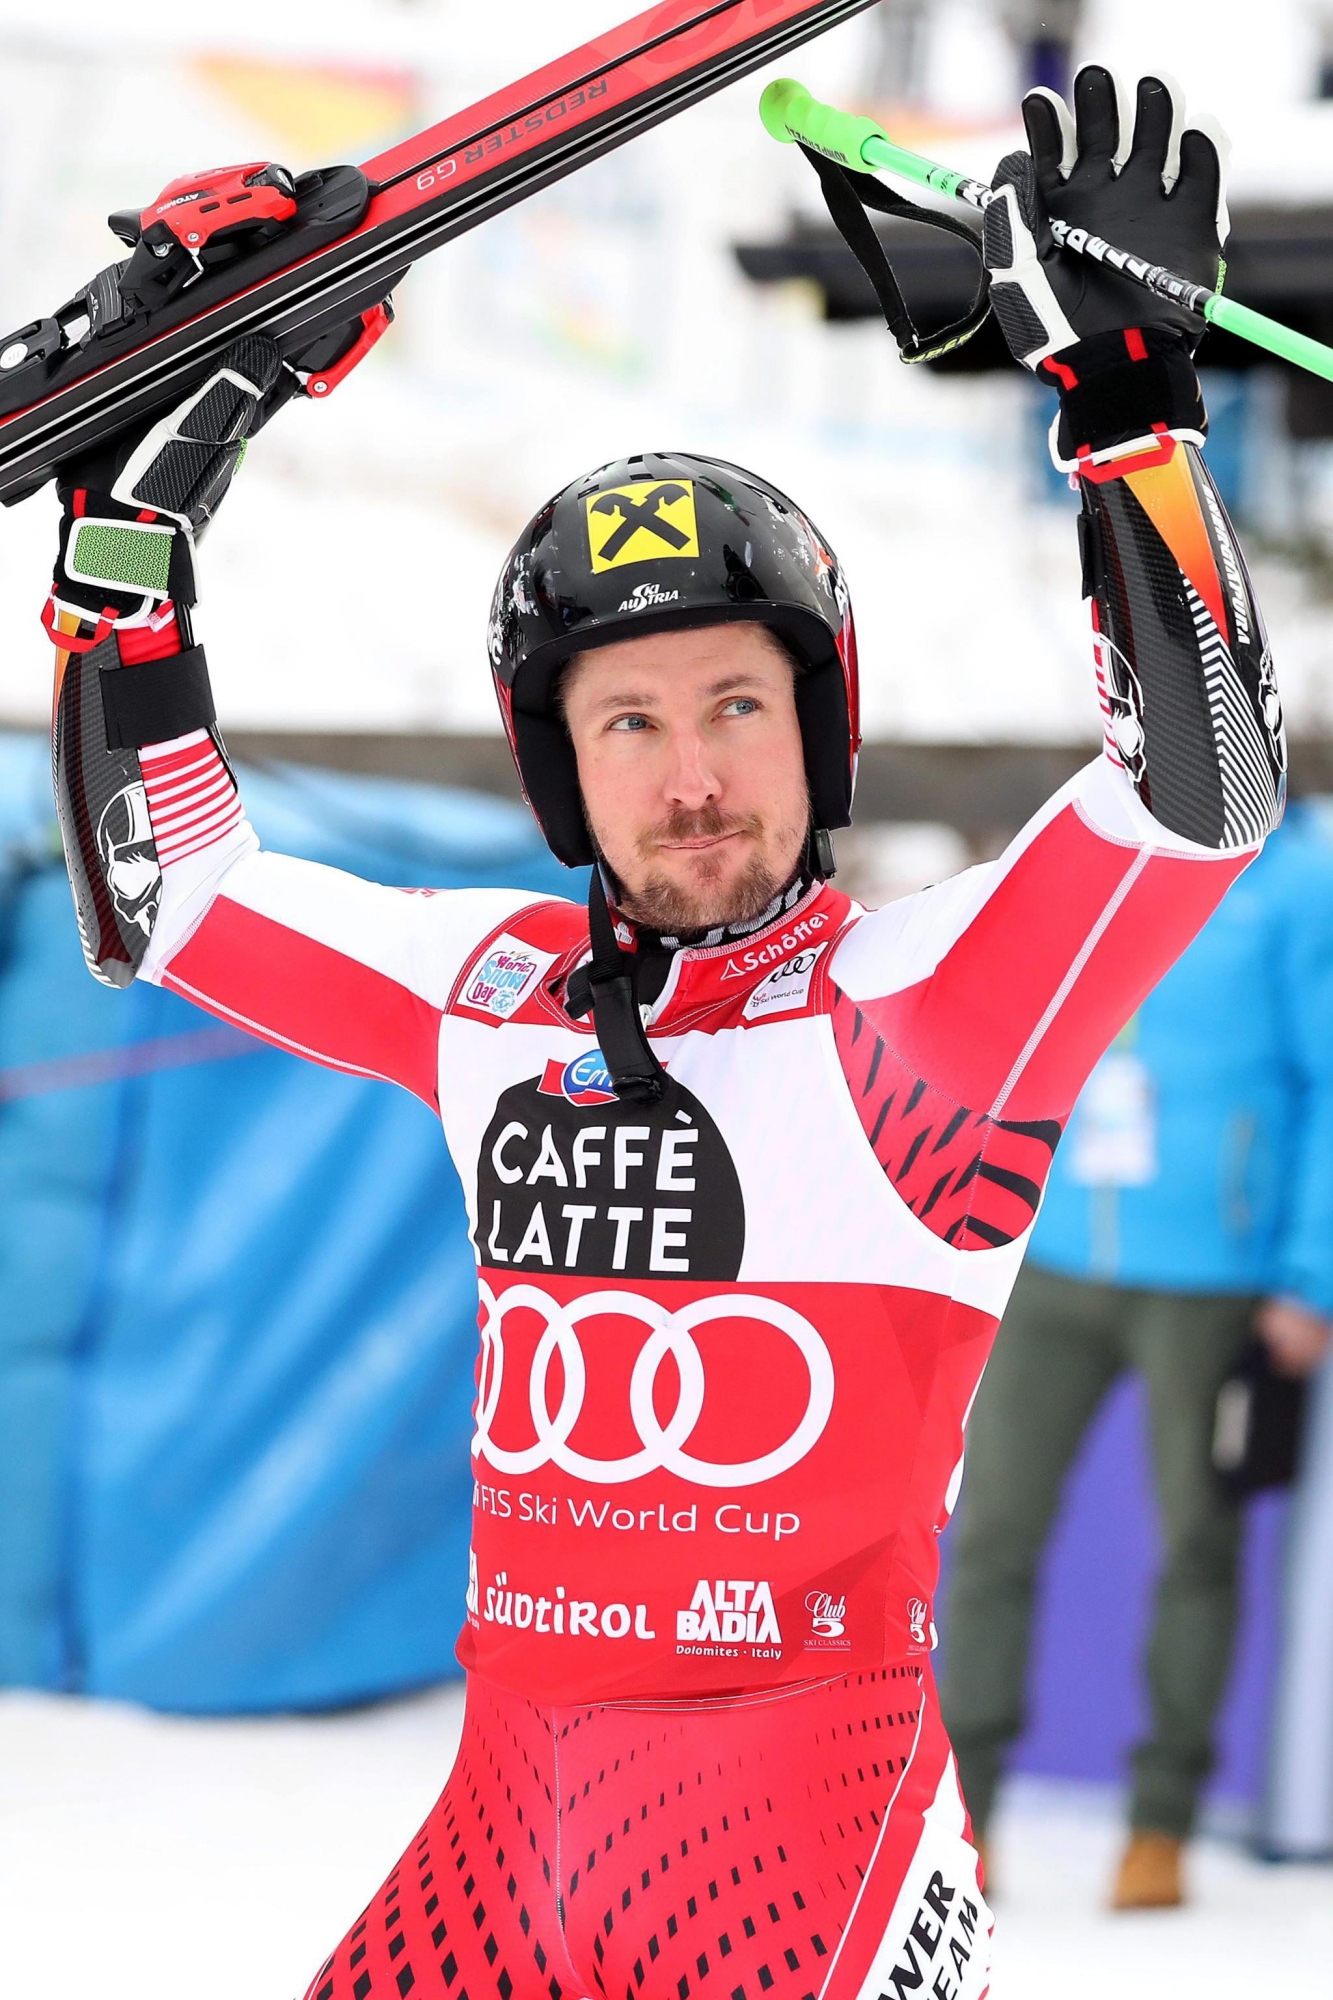 epa07235376 Winner Marcel Hirscher of Austria celebrates in the finish area after the Men's Giant Slalom race at the FIS Alpine Skiing World Cup event in Alta Badia, Italy, 16 December 2018.  EPA/ANDREA SOLERO ITALY ALPINE SKIING WORLD CUP